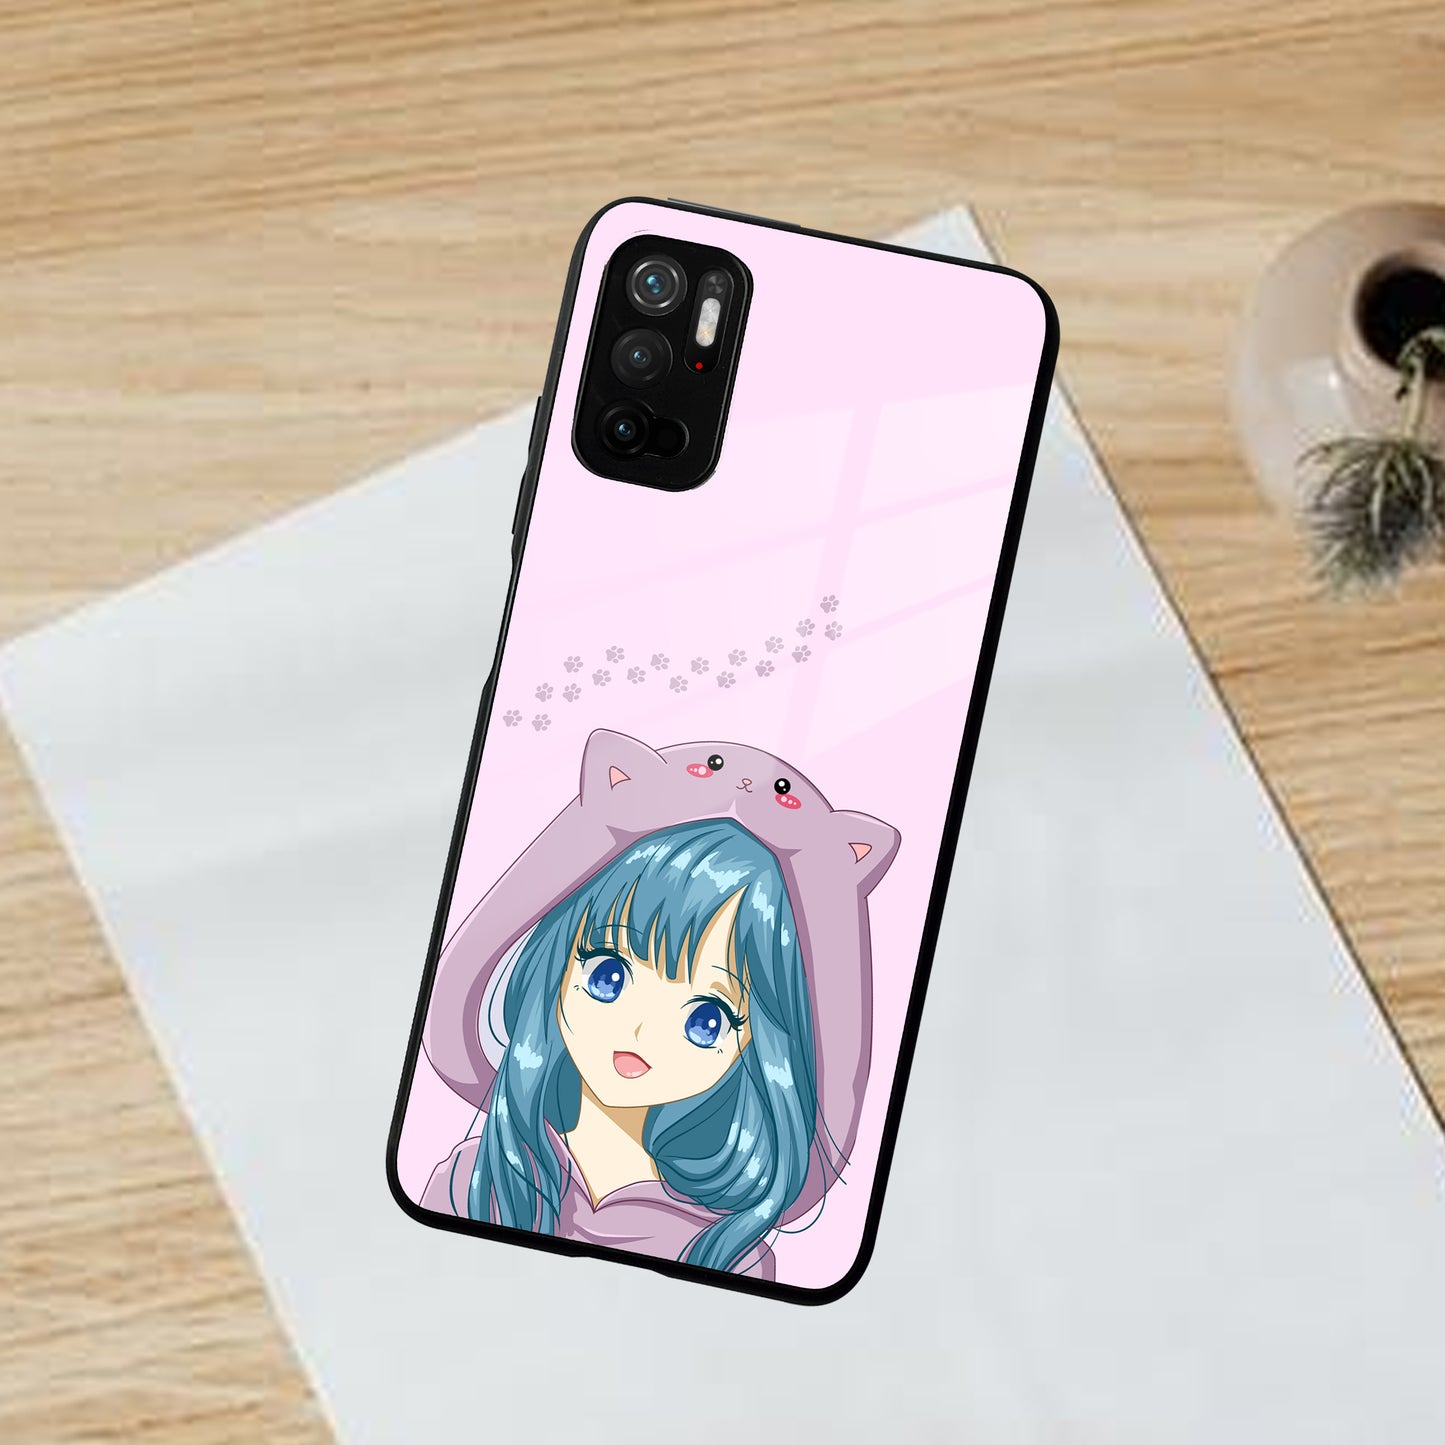 Purple Aesthetic Girl With Cat Phone Glass Case Cover For POCO